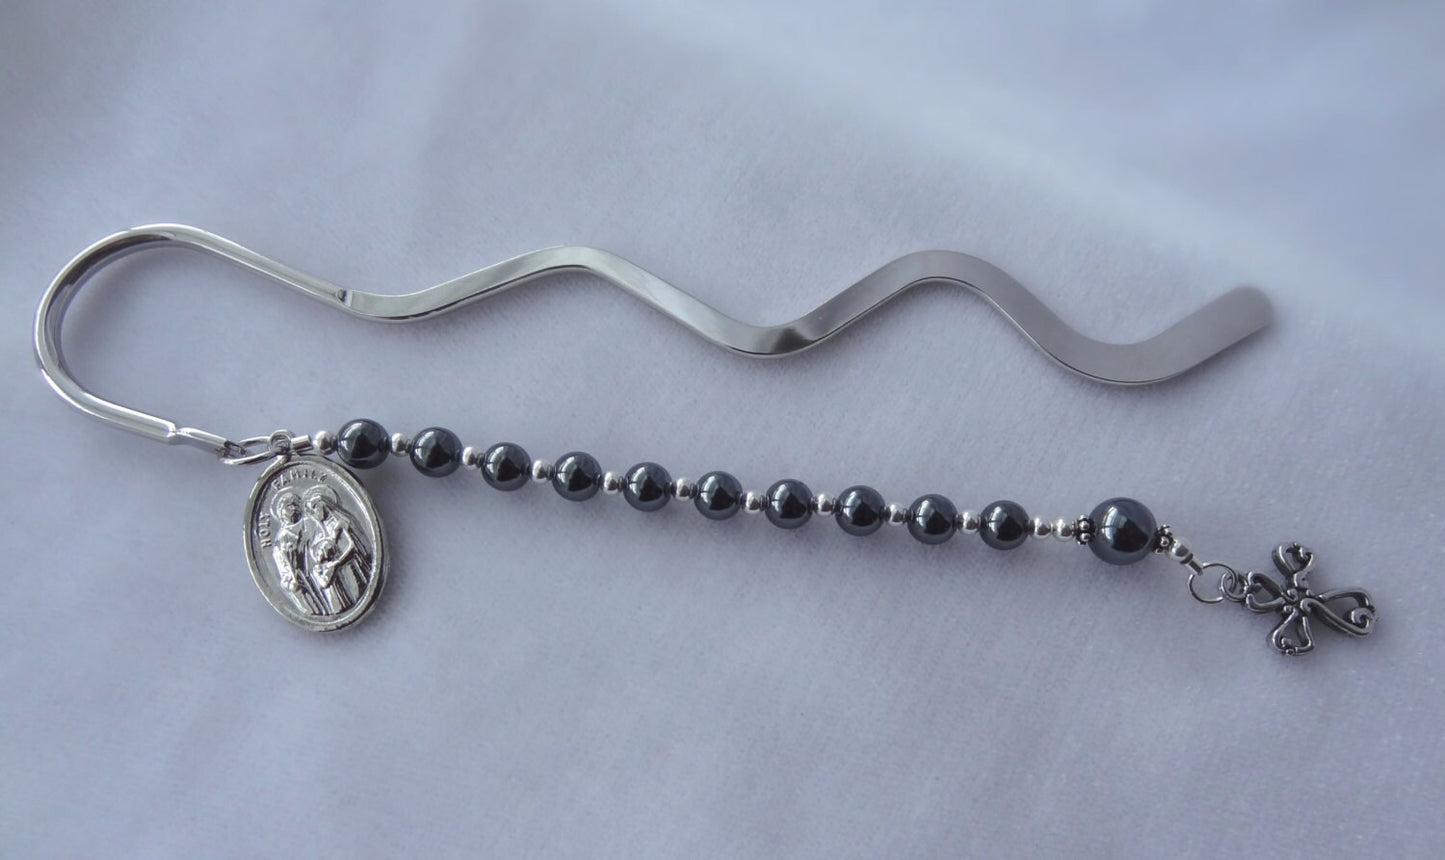 Godfather Present-Baptism Personalized Rosary Bookmark,Baptism Present,First Communion Gift,Godparents Present Gift Favor,Bookmark Favor